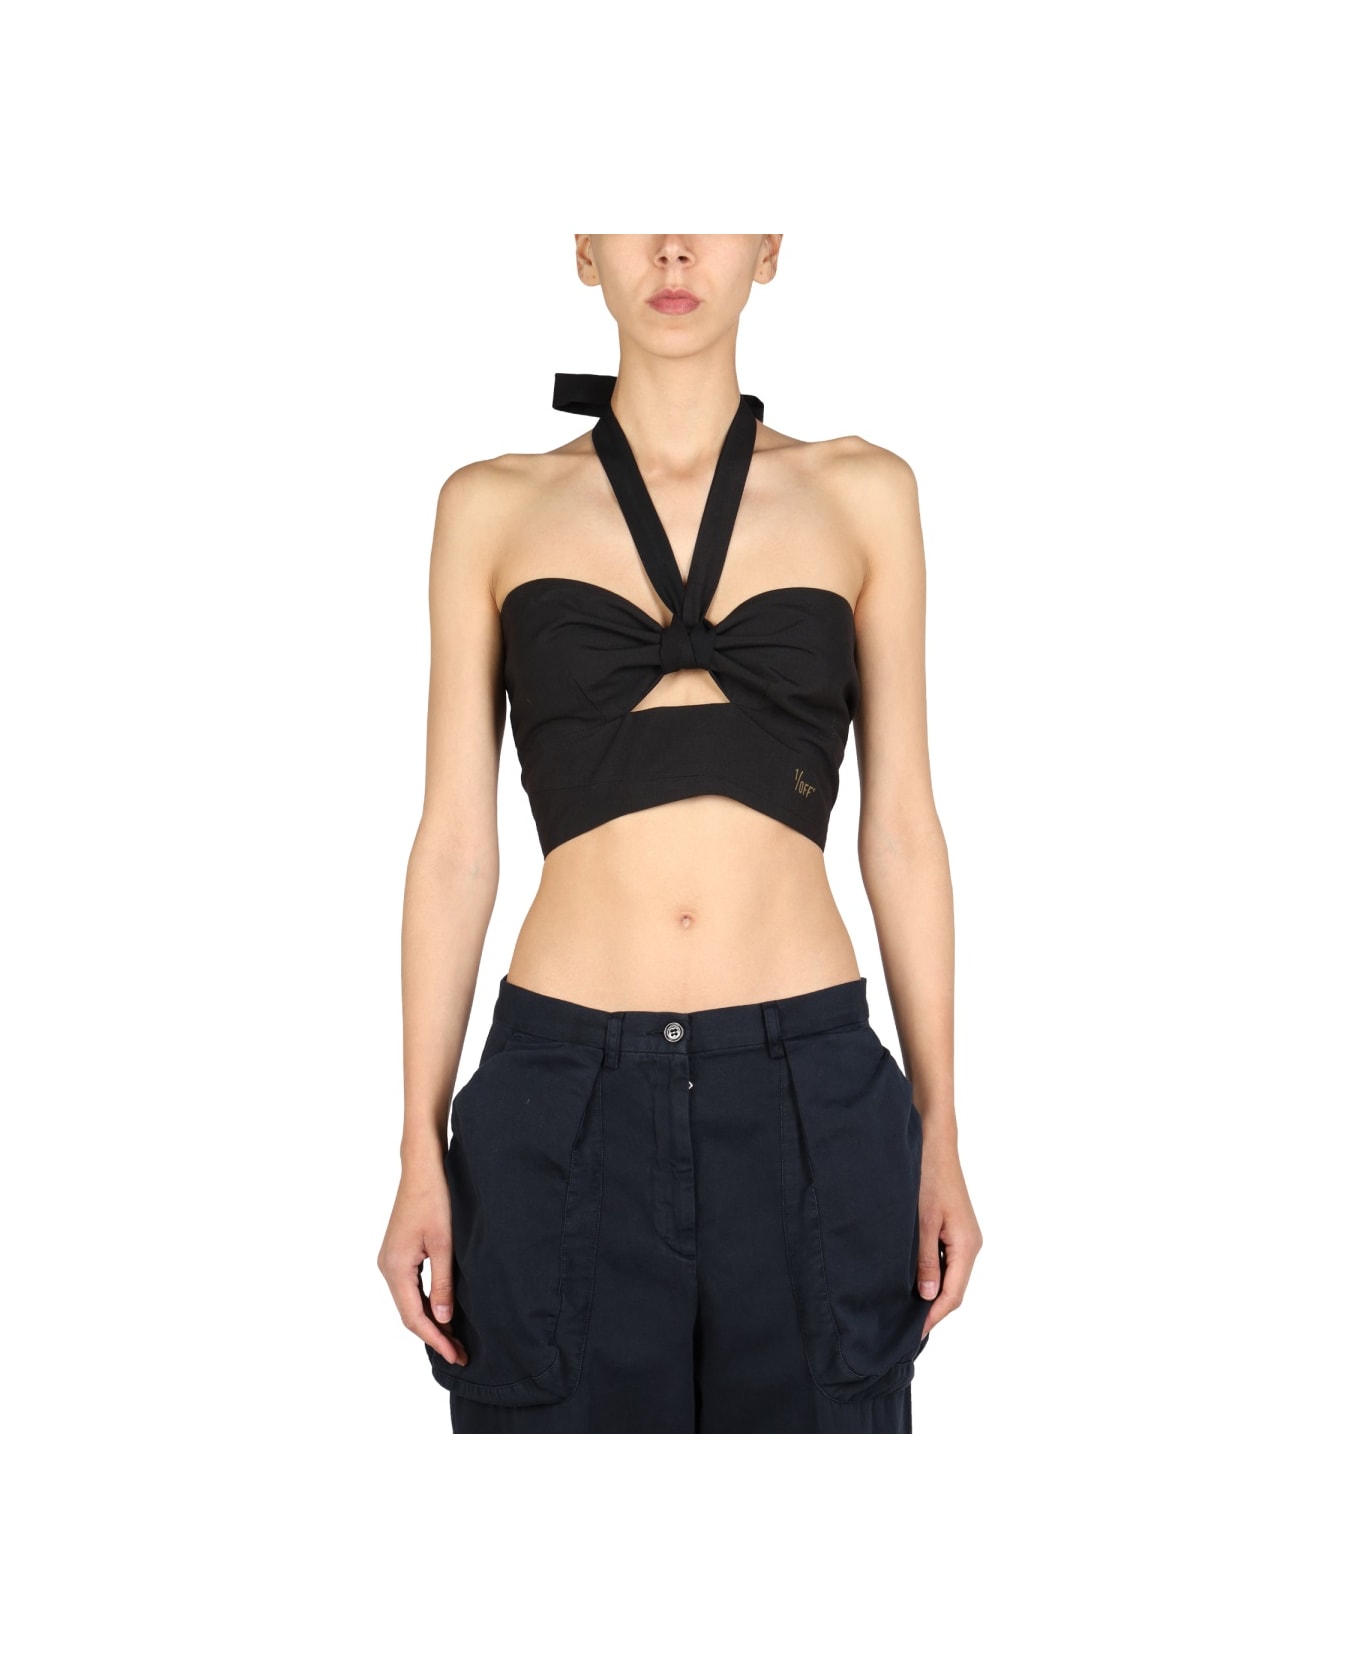 1/OFF Top With Crossed Straps - BLACK